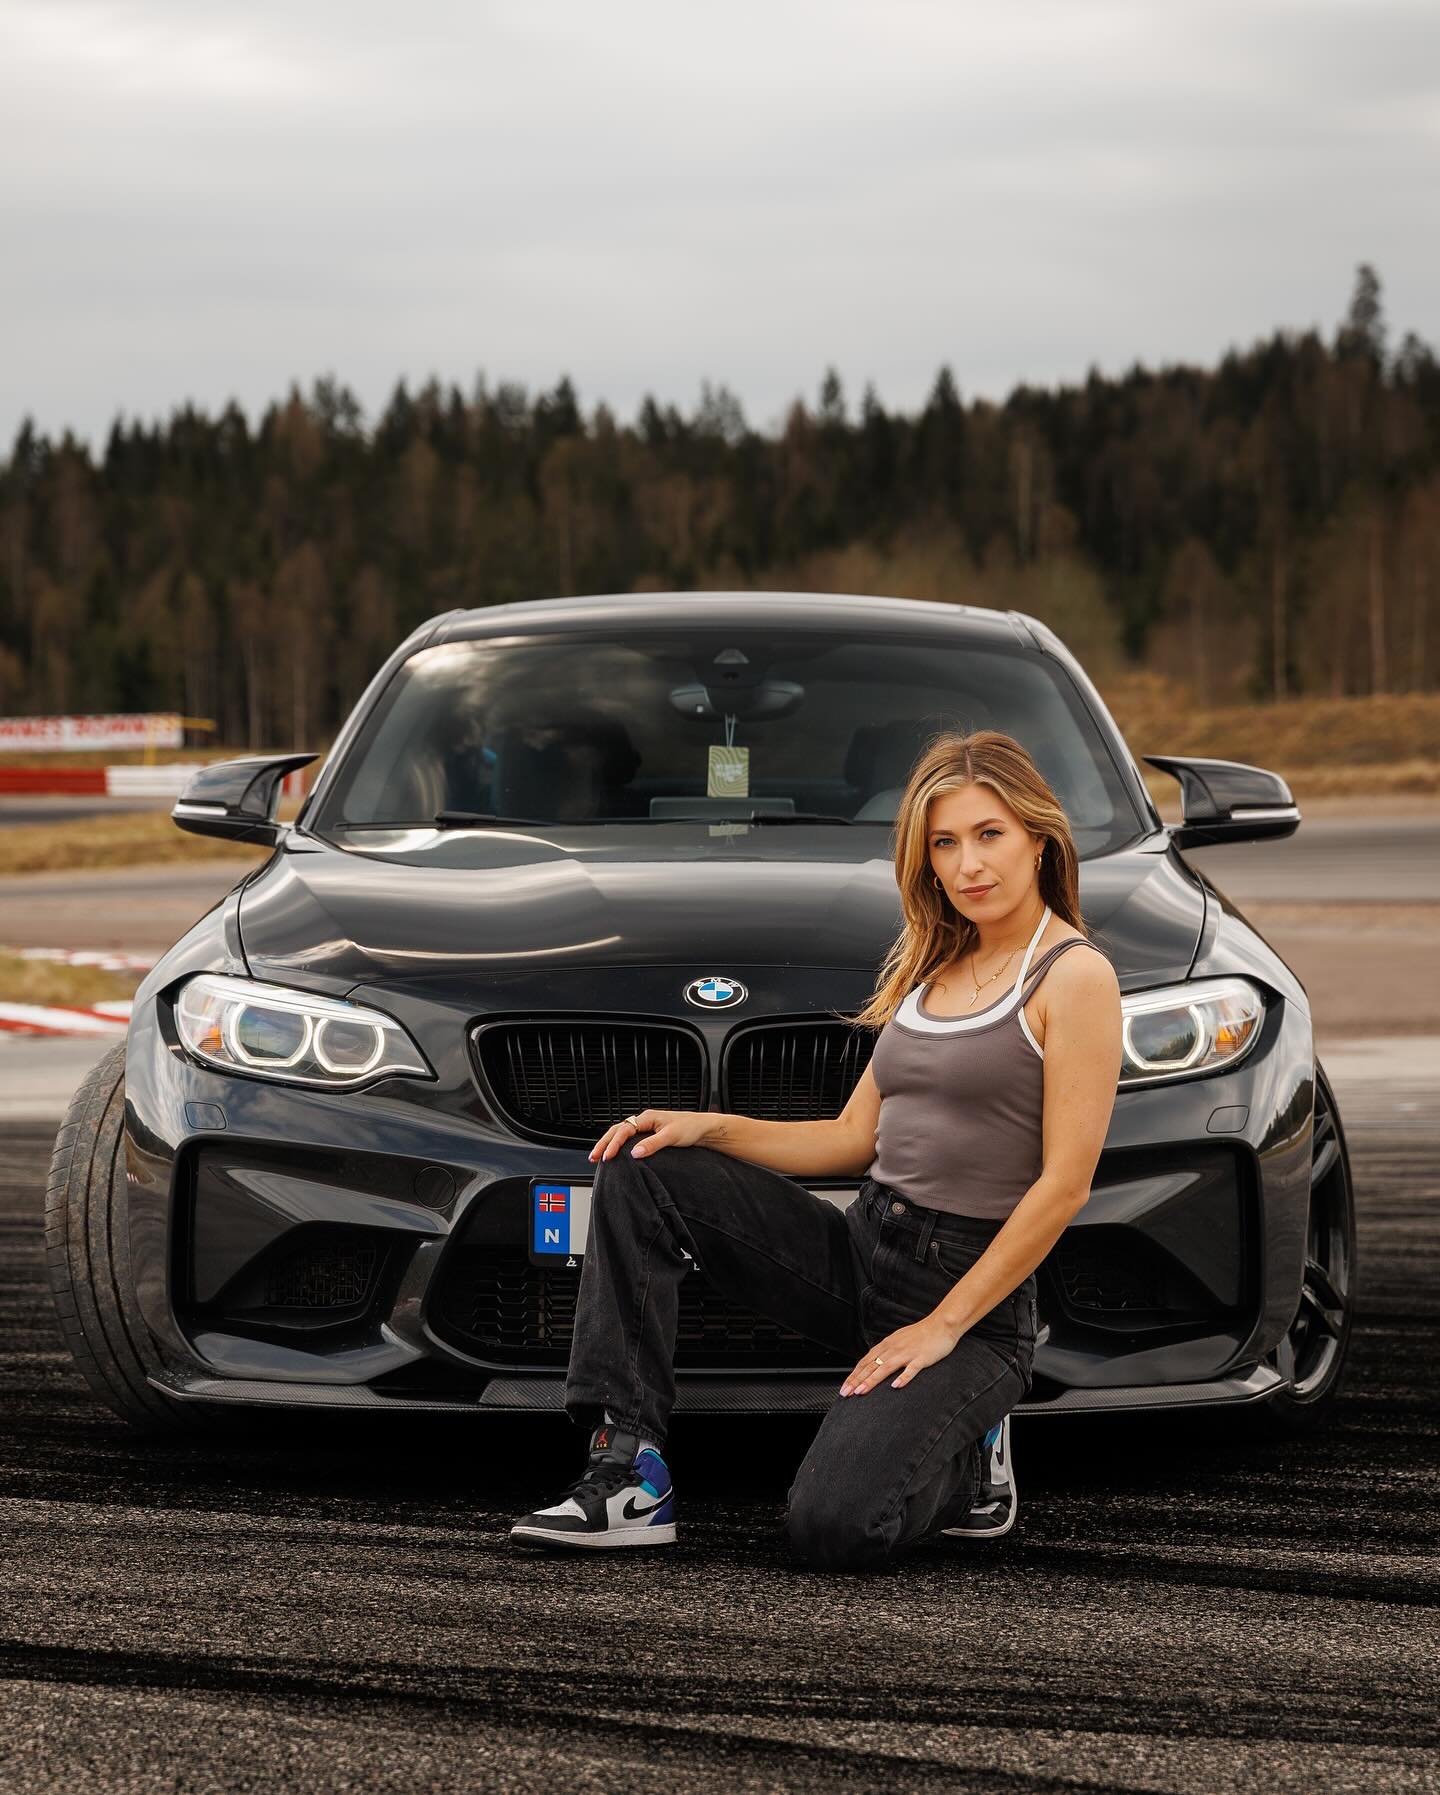 Meet the first street car I&rsquo;ve ever bought myself 🥹 besides drift cars, of course 😉 2017 BMW M2, welcome to the family! I love this damn car more than I could have imagined 💜
.⁣ 
.⁣ Photos @helheimltd 
.⁣ 
.⁣ 
.⁣
#bmwm2 #bimmer #bmwnorway #b